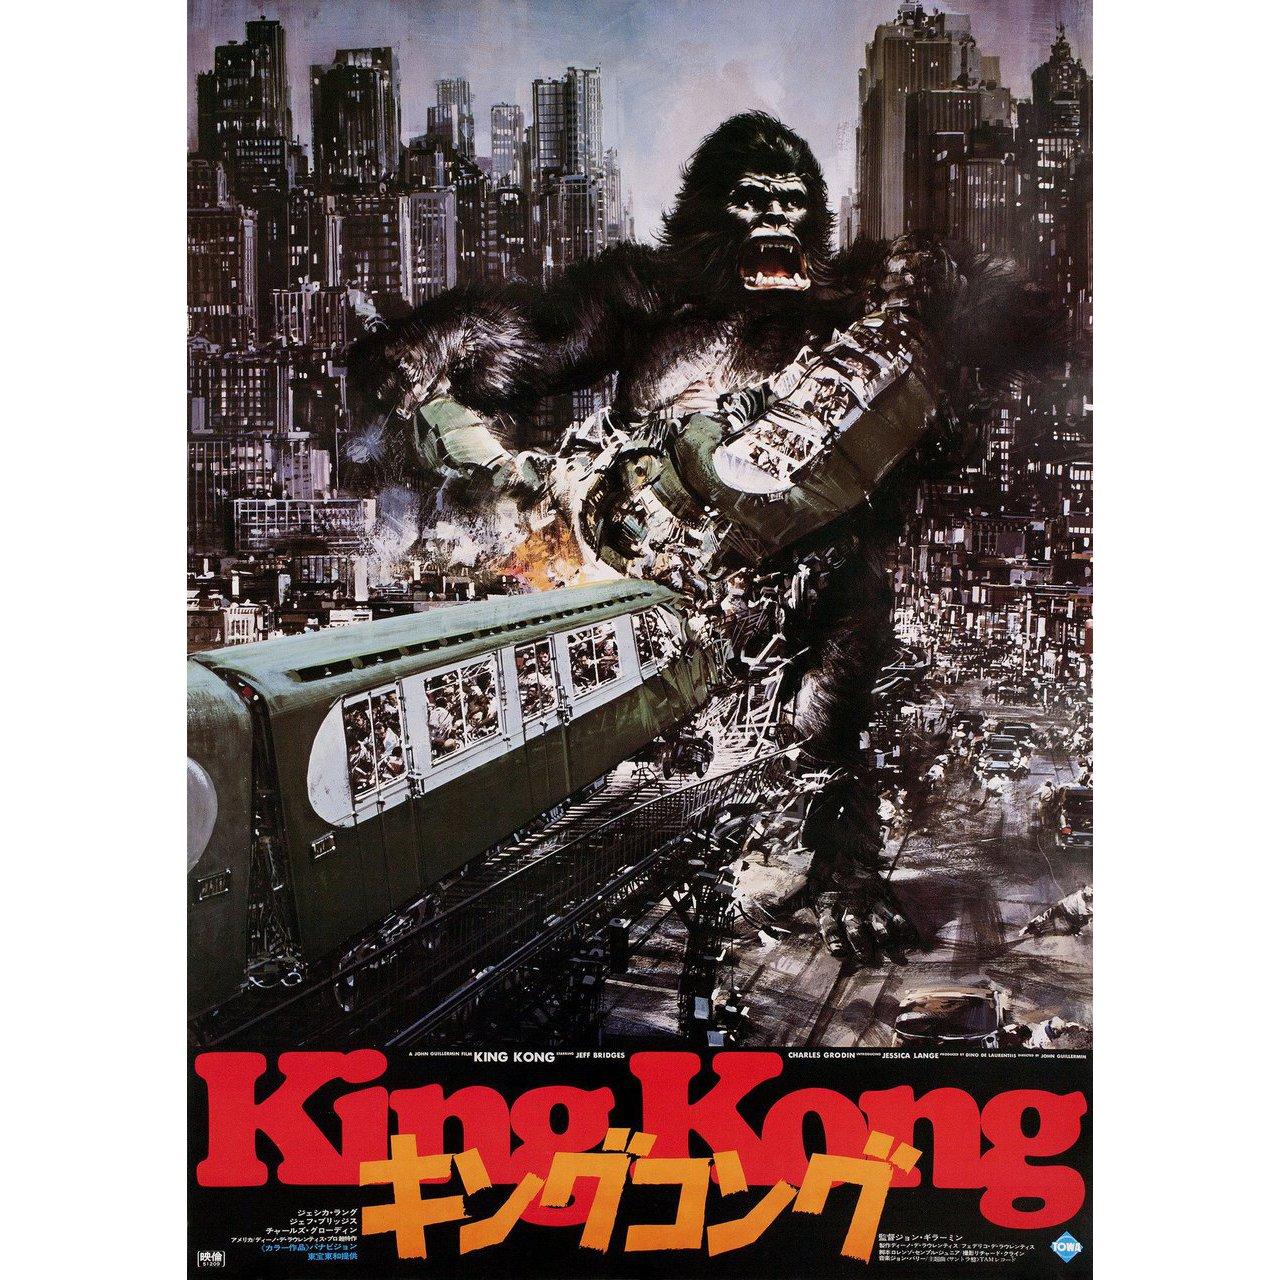 Original 1976 Japanese B2 poster by John Berkey for the film King Kong directed by John Guillermin with Jeff Bridges / Charles Grodin / Jessica Lange / John Randolph. Fine condition, rolled. Please note: the size is stated in inches and the actual